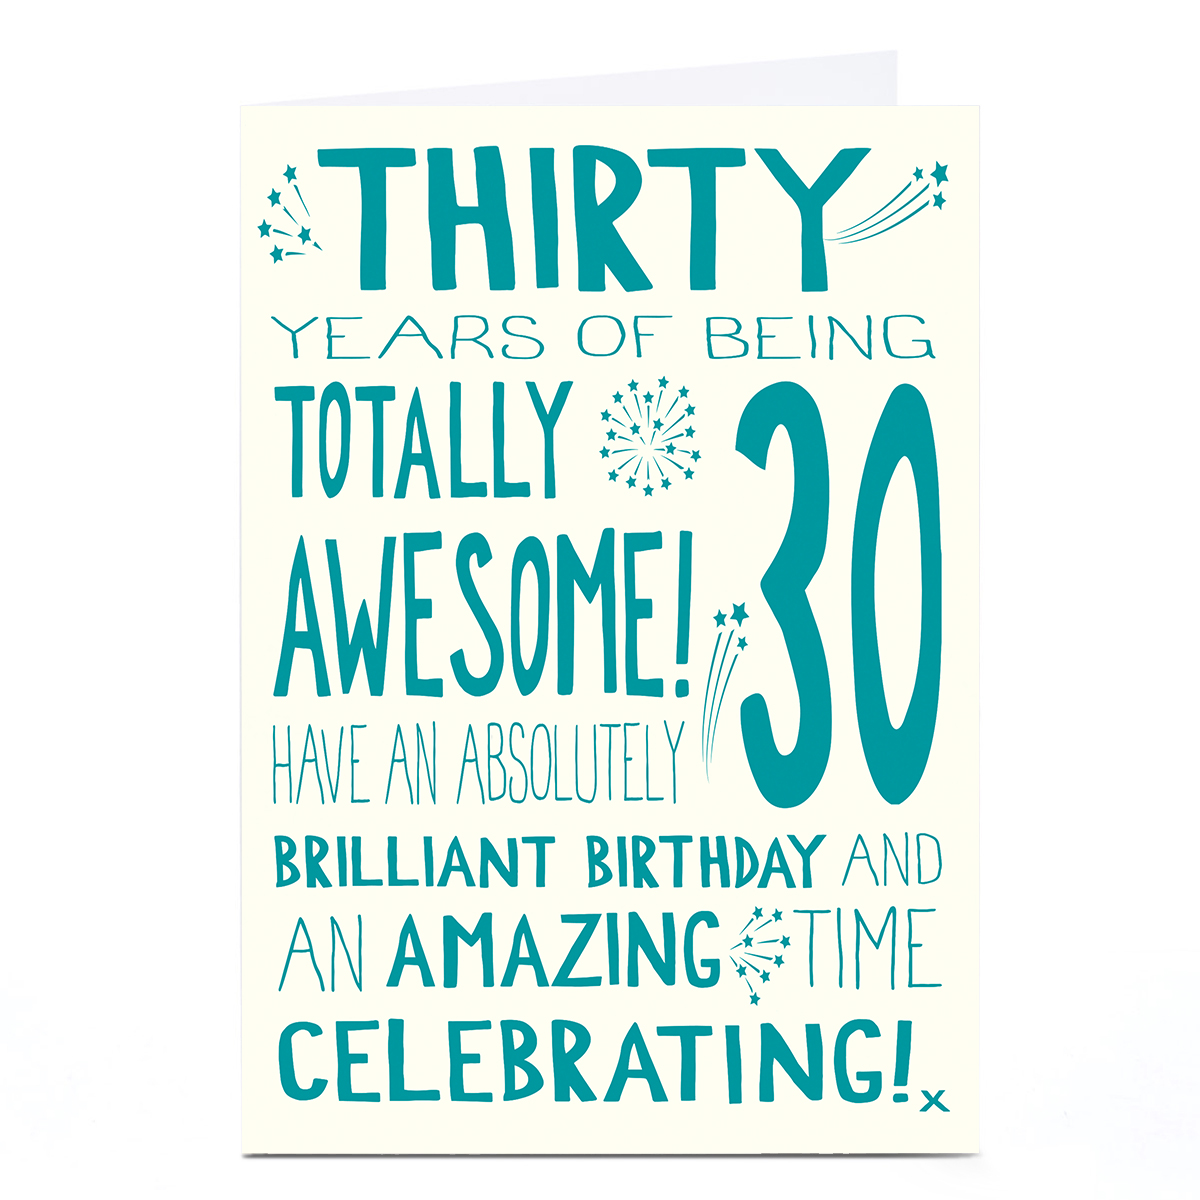 Buy Personalised 30th Birthday Card - Totally Awesome! for GBP 2.29 ...